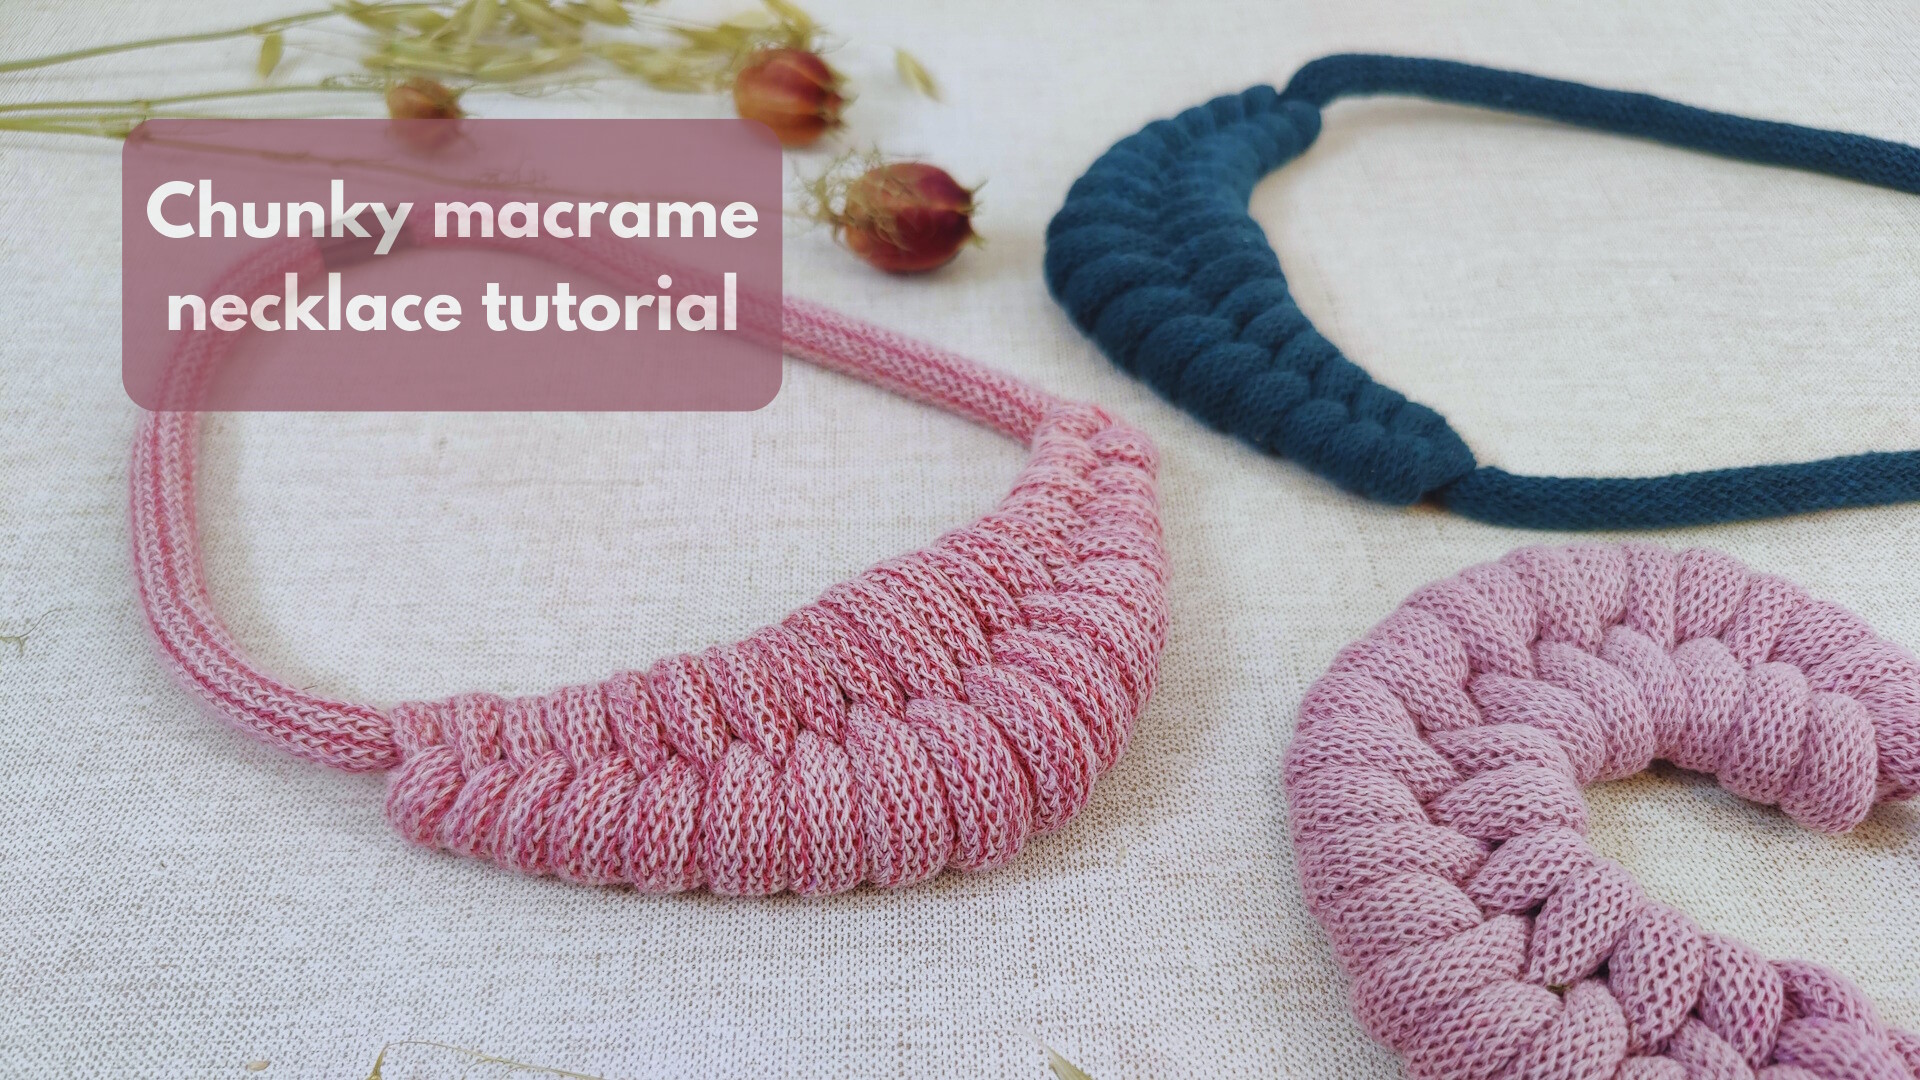 Chunky macrame necklace tutorial featured